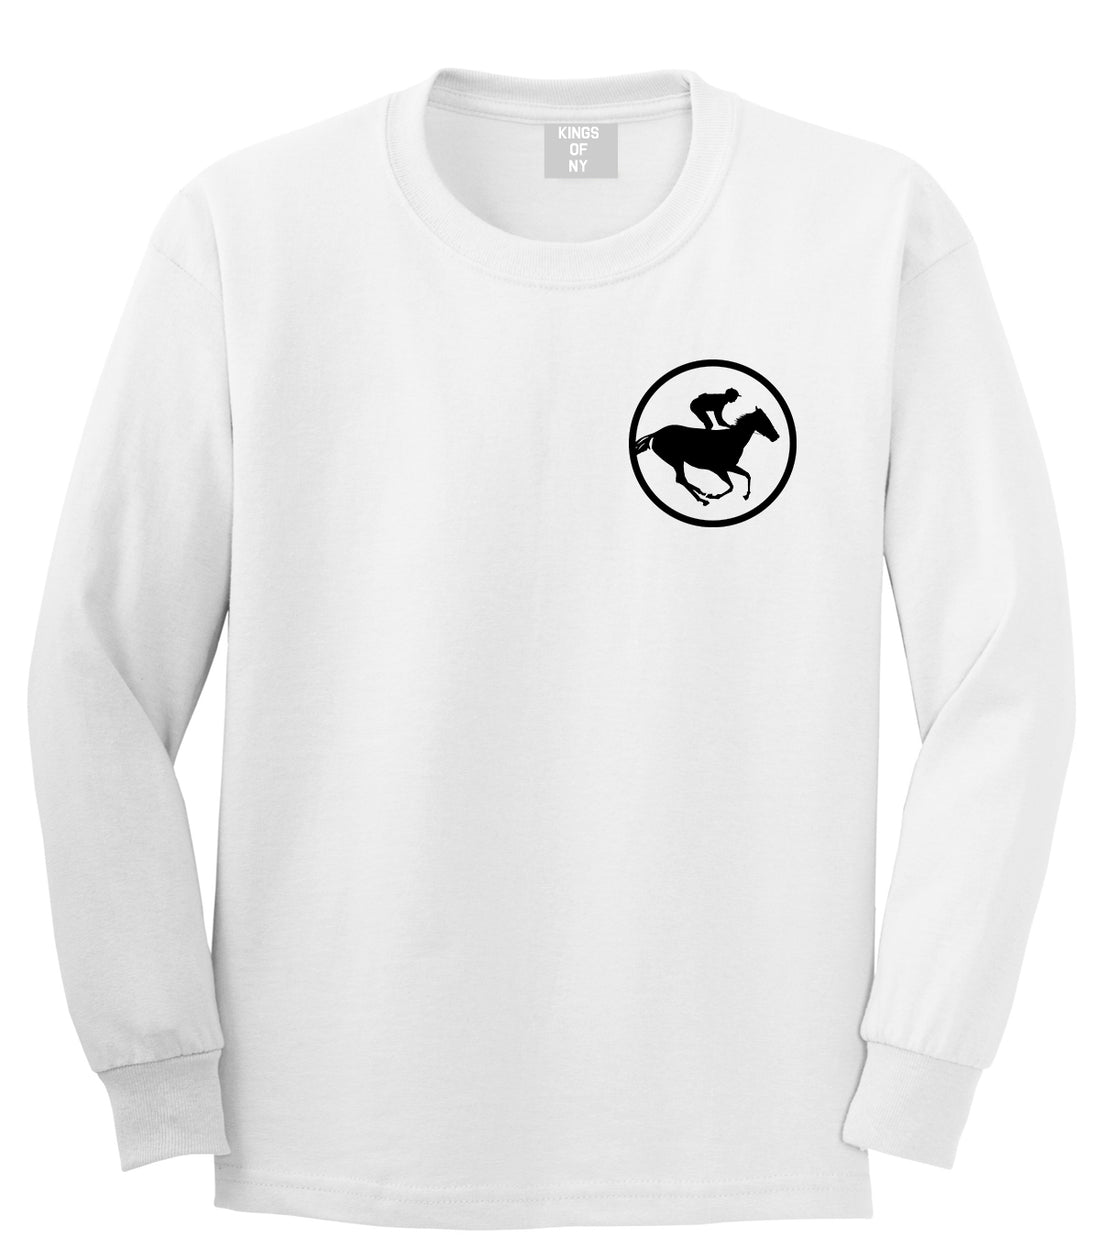 Derby Horse Racing Chest Mens White Long Sleeve T-Shirt by Kings Of NY